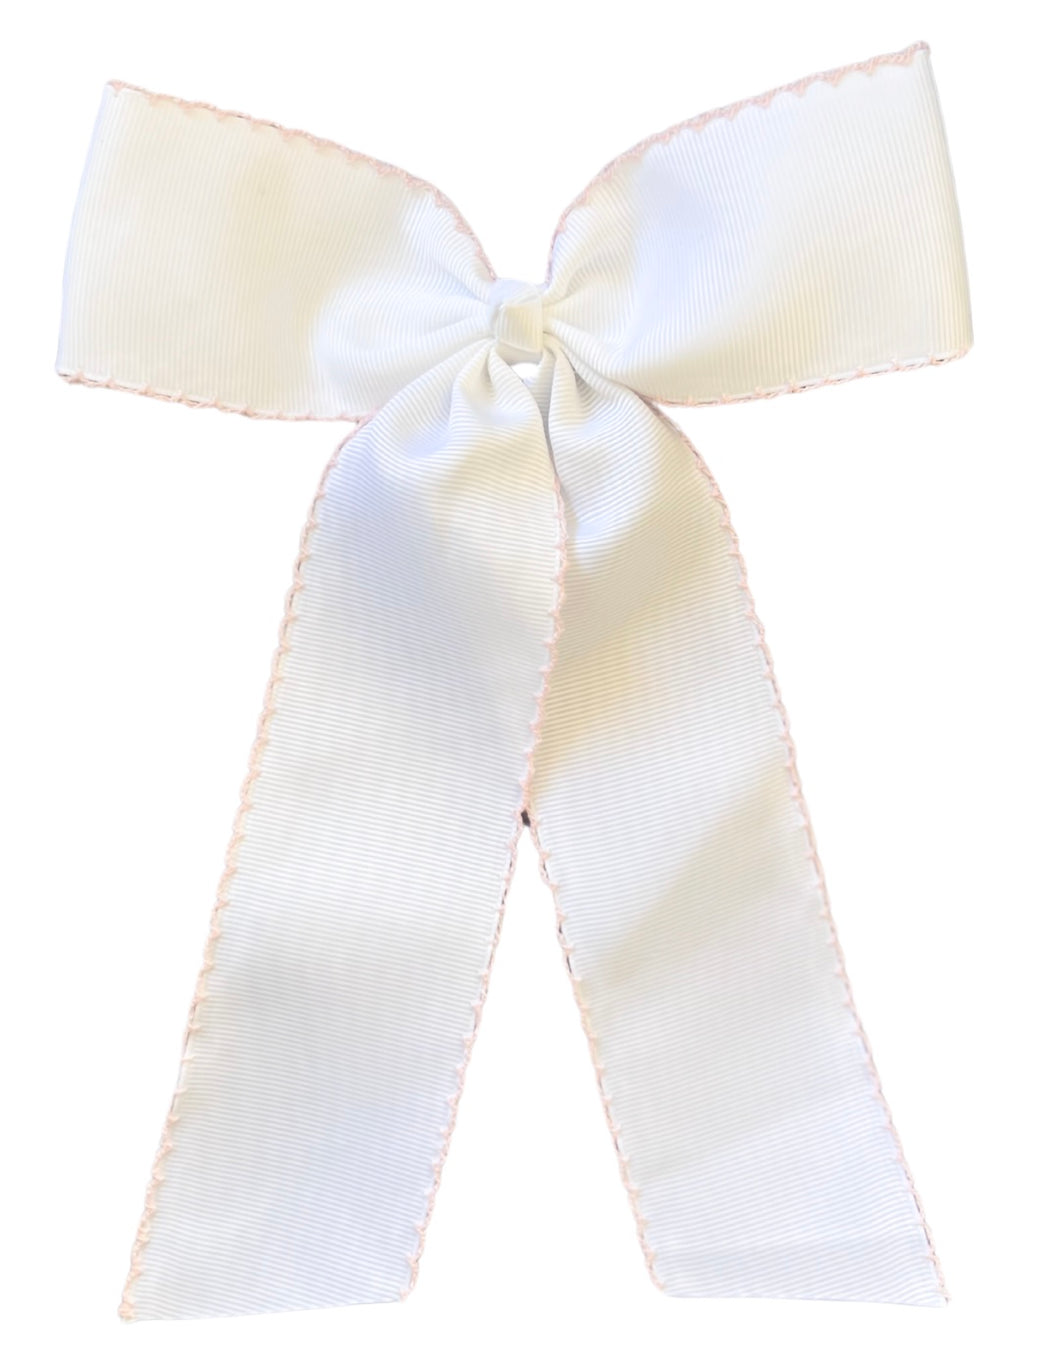 The Preppy Long Hair Bow - Classic White/Pale Pink